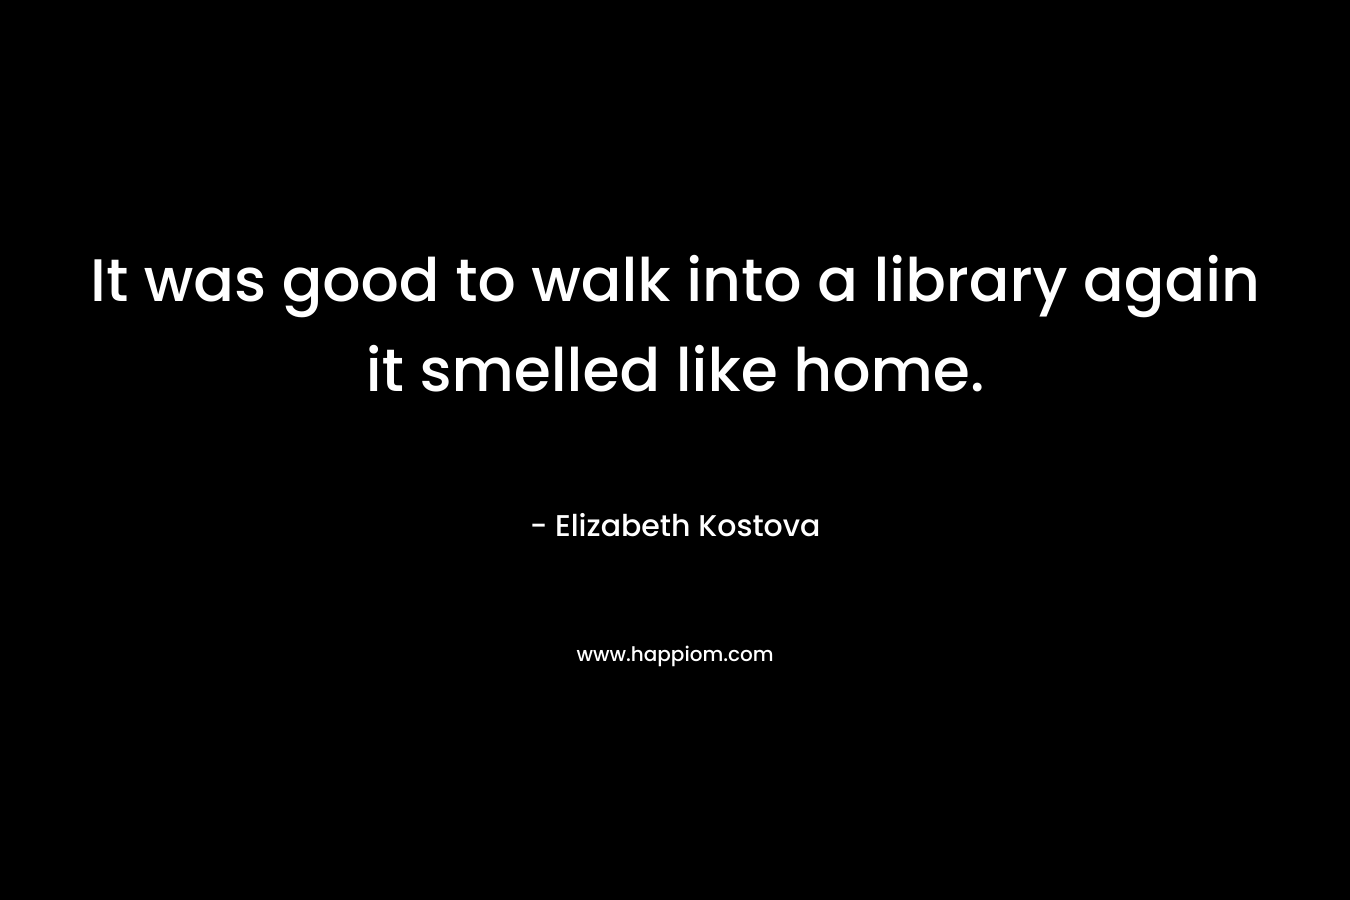 It was good to walk into a library again it smelled like home.